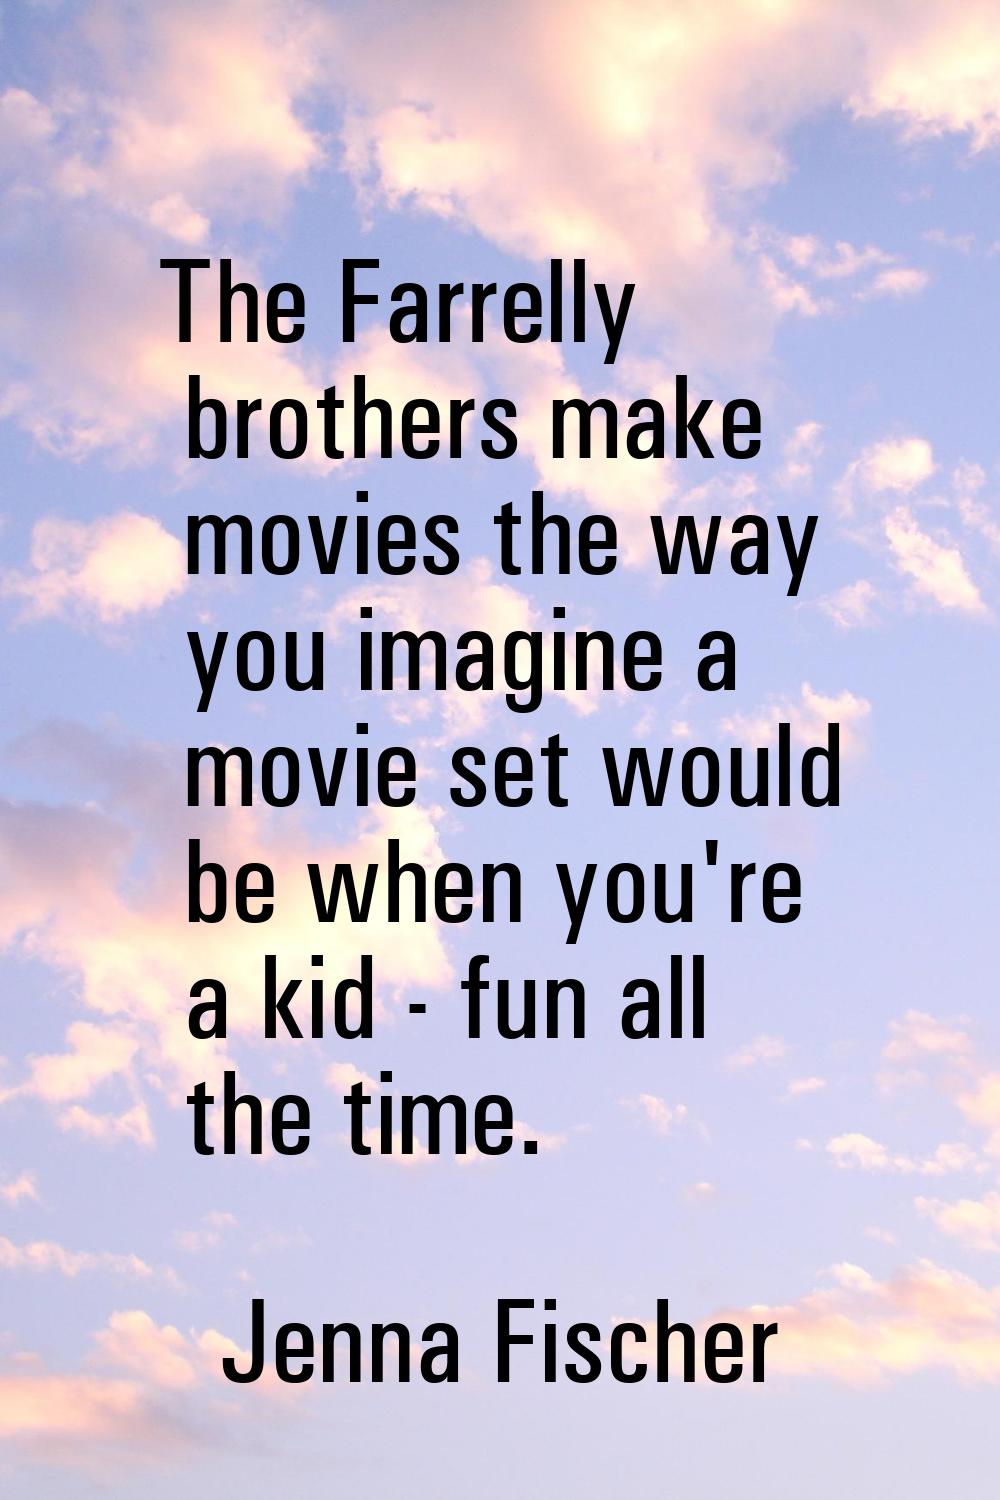 The Farrelly brothers make movies the way you imagine a movie set would be when you're a kid - fun 